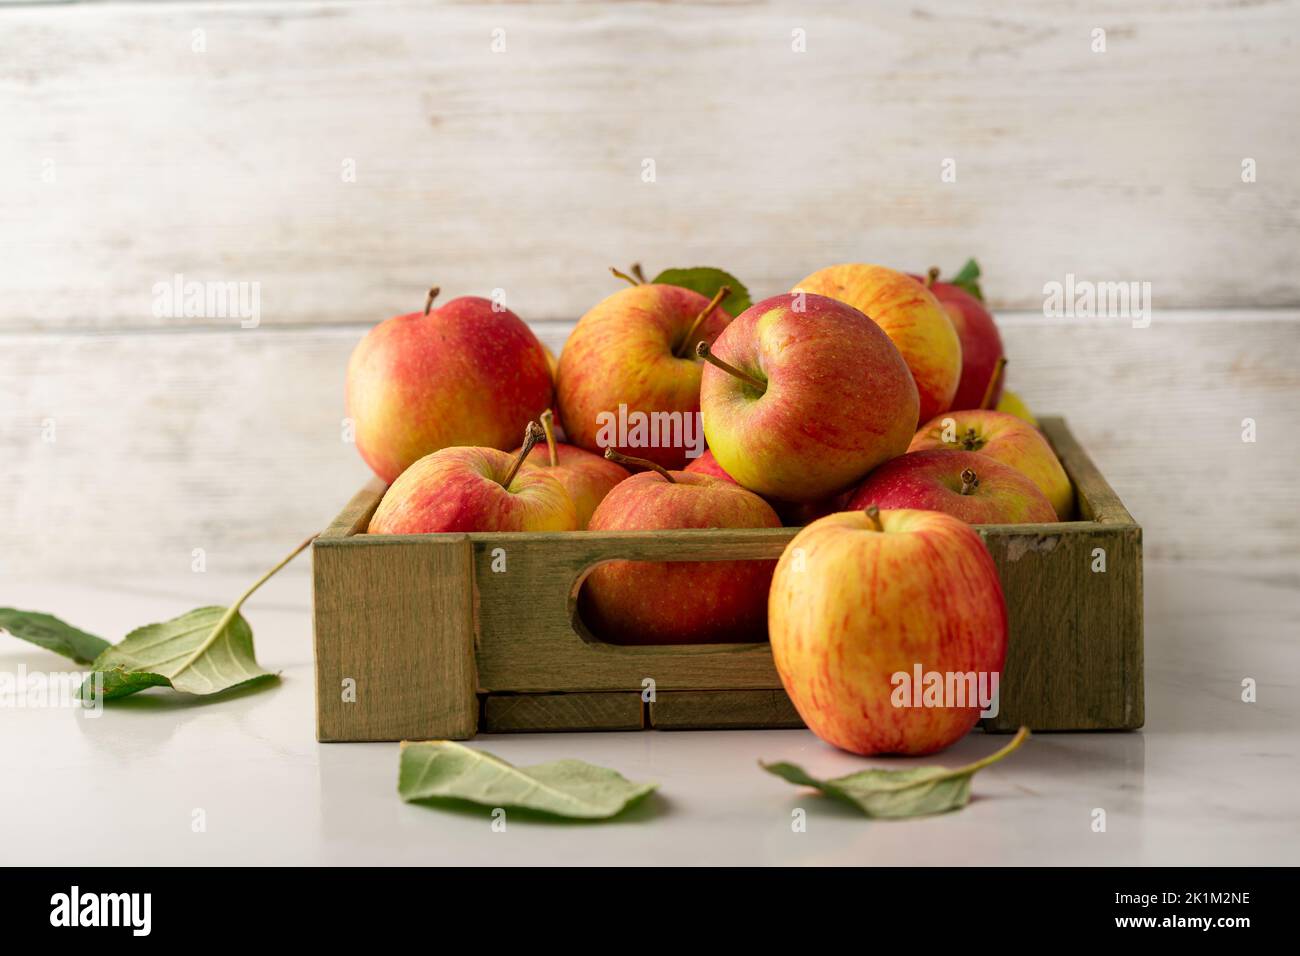 Close up of Yellow and red apples in wooden crate on light surface food harvest concept Stock Photo